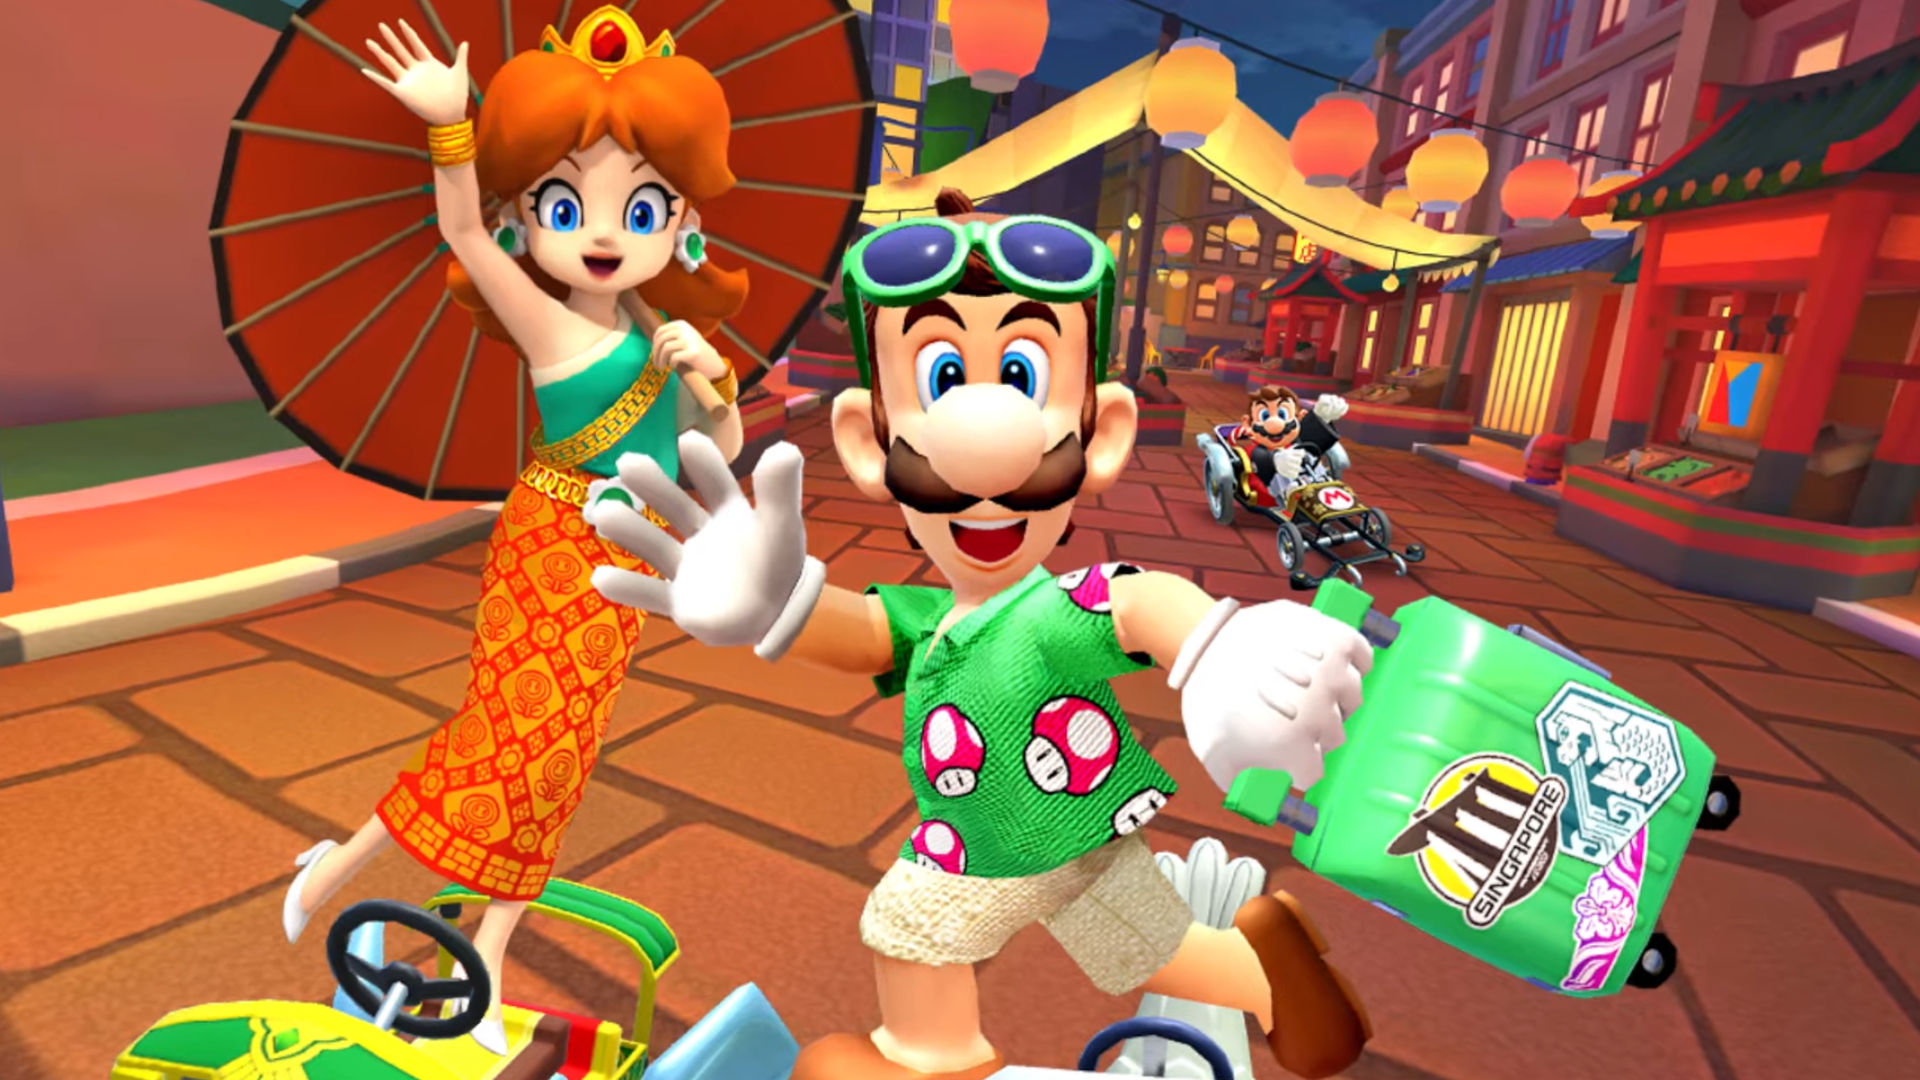 Mario Kart Tour winter tour update set to see the sights of Singapore